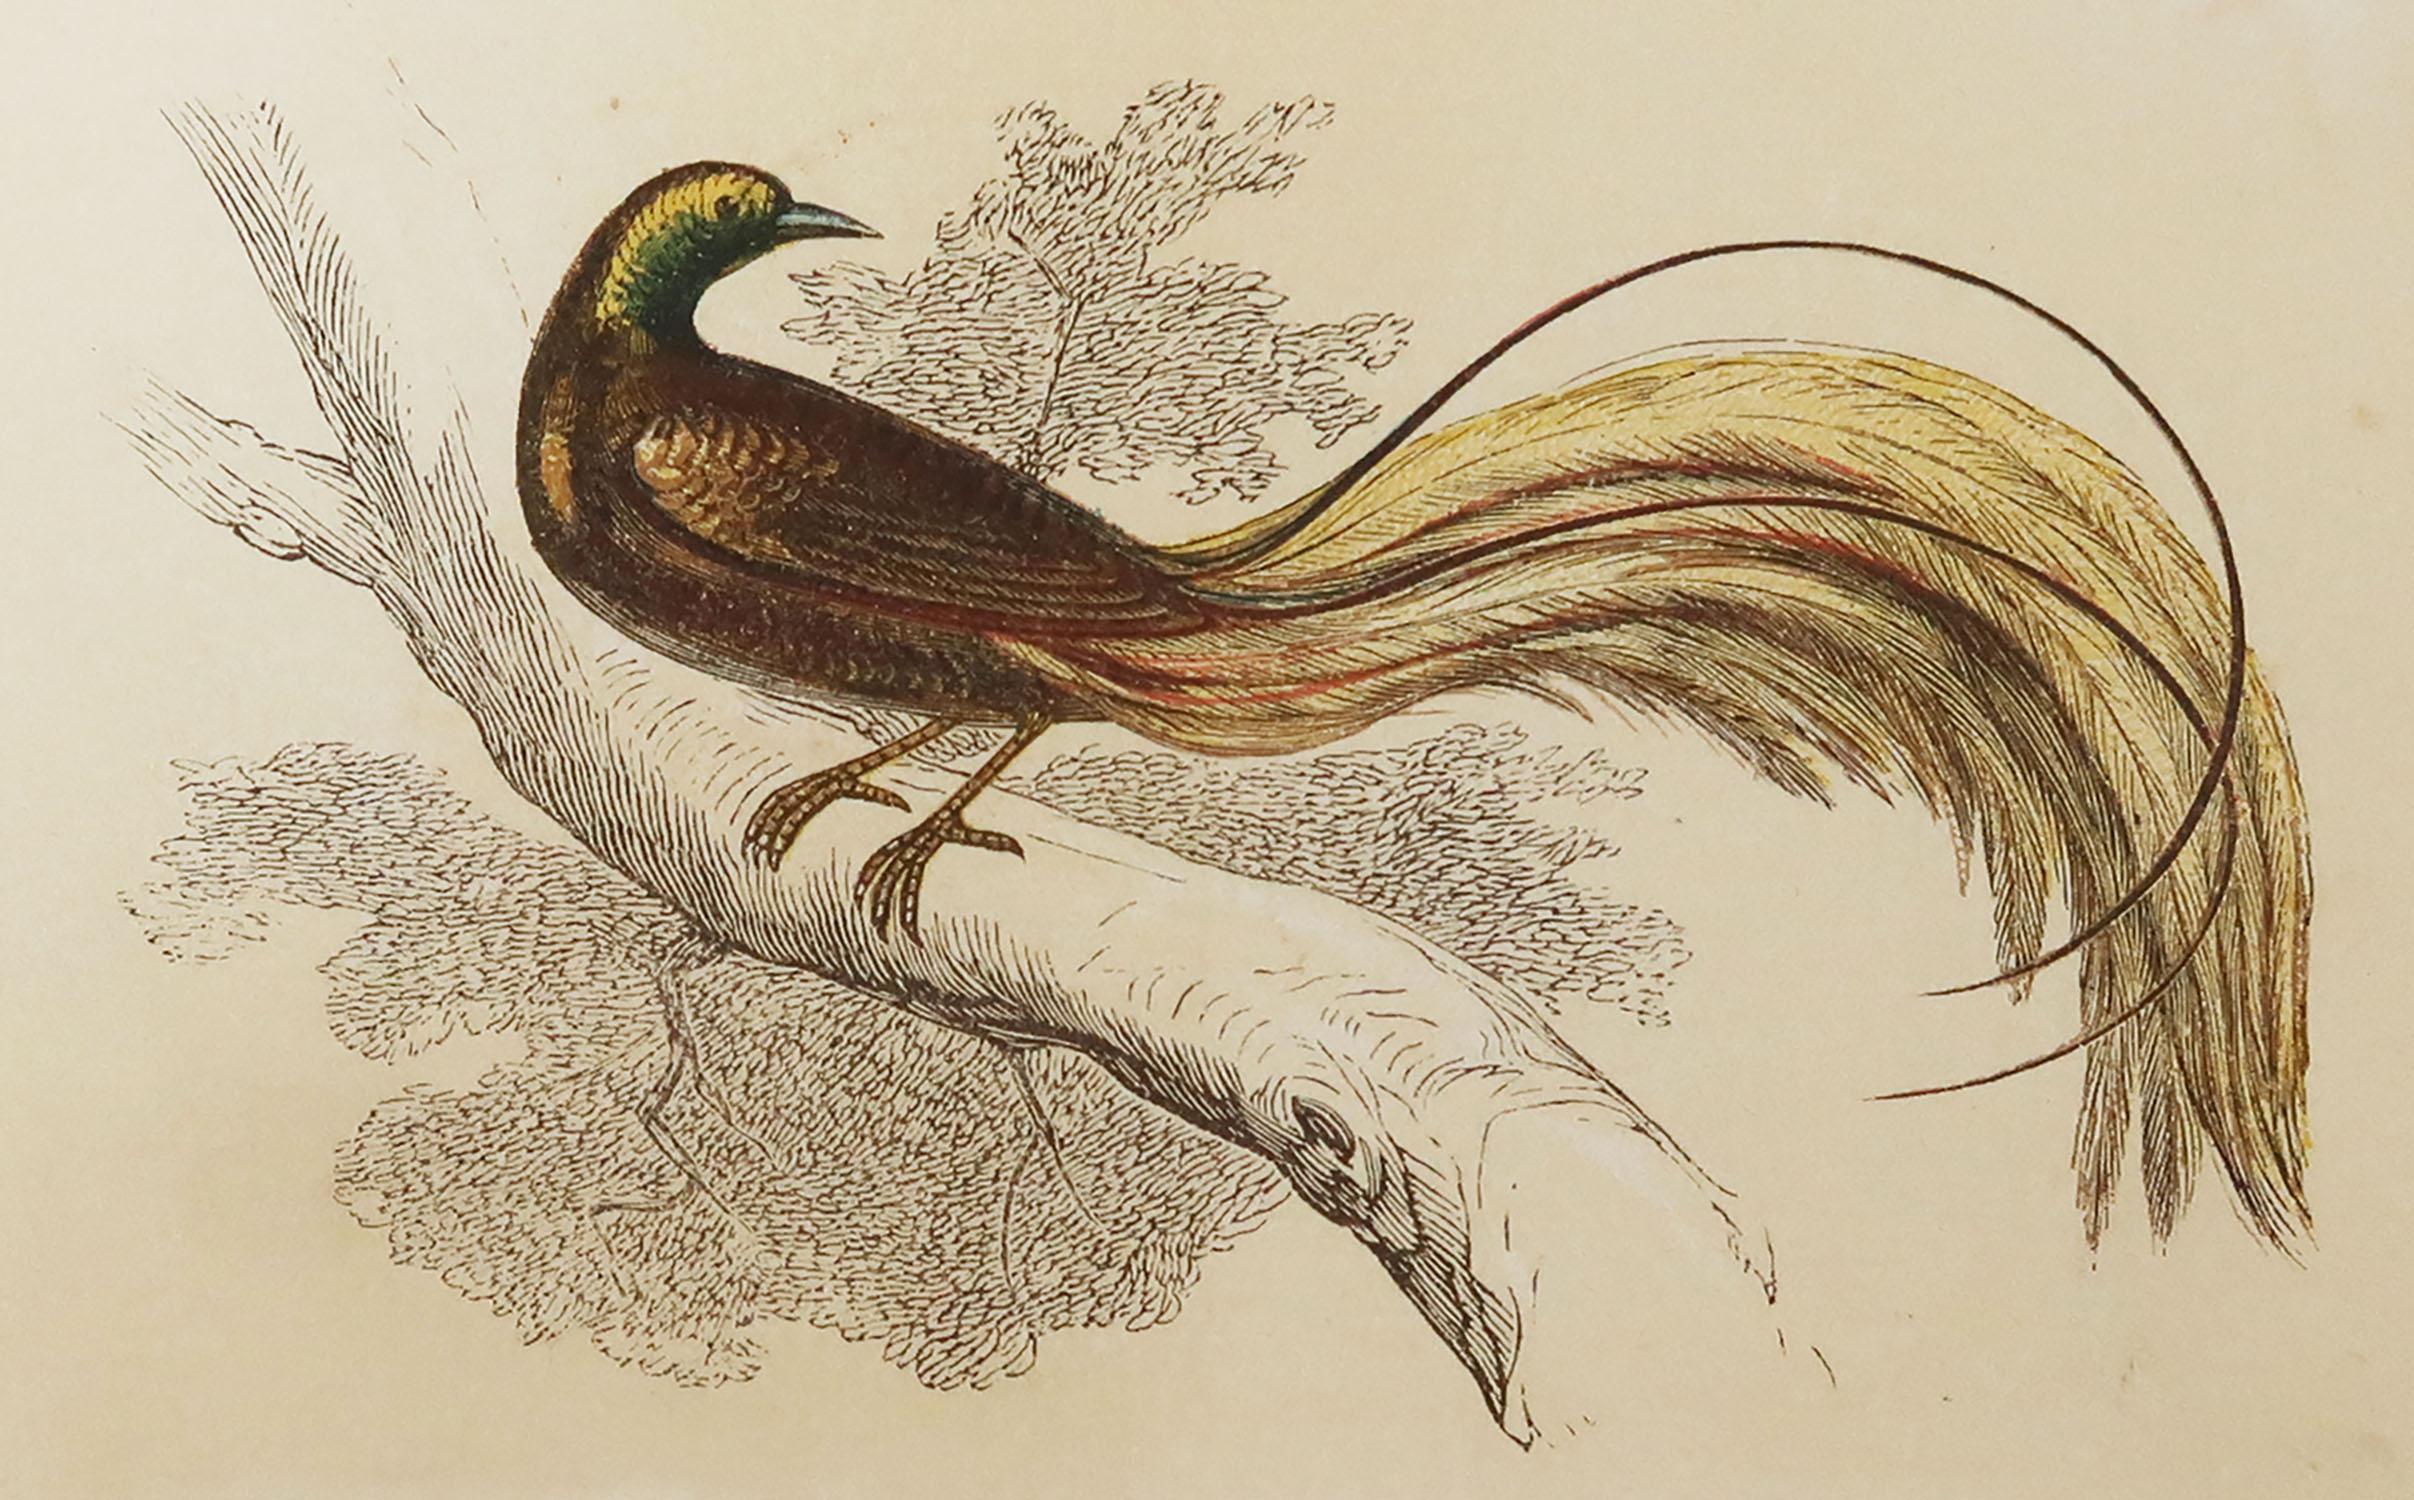 Great image of a great emerald bird of paradise

Unframed. It gives you the option of perhaps making a set up using your own choice of frames.

Lithograph with original color.

Published by Tallis circa 1850

Crudely inscribed title has been